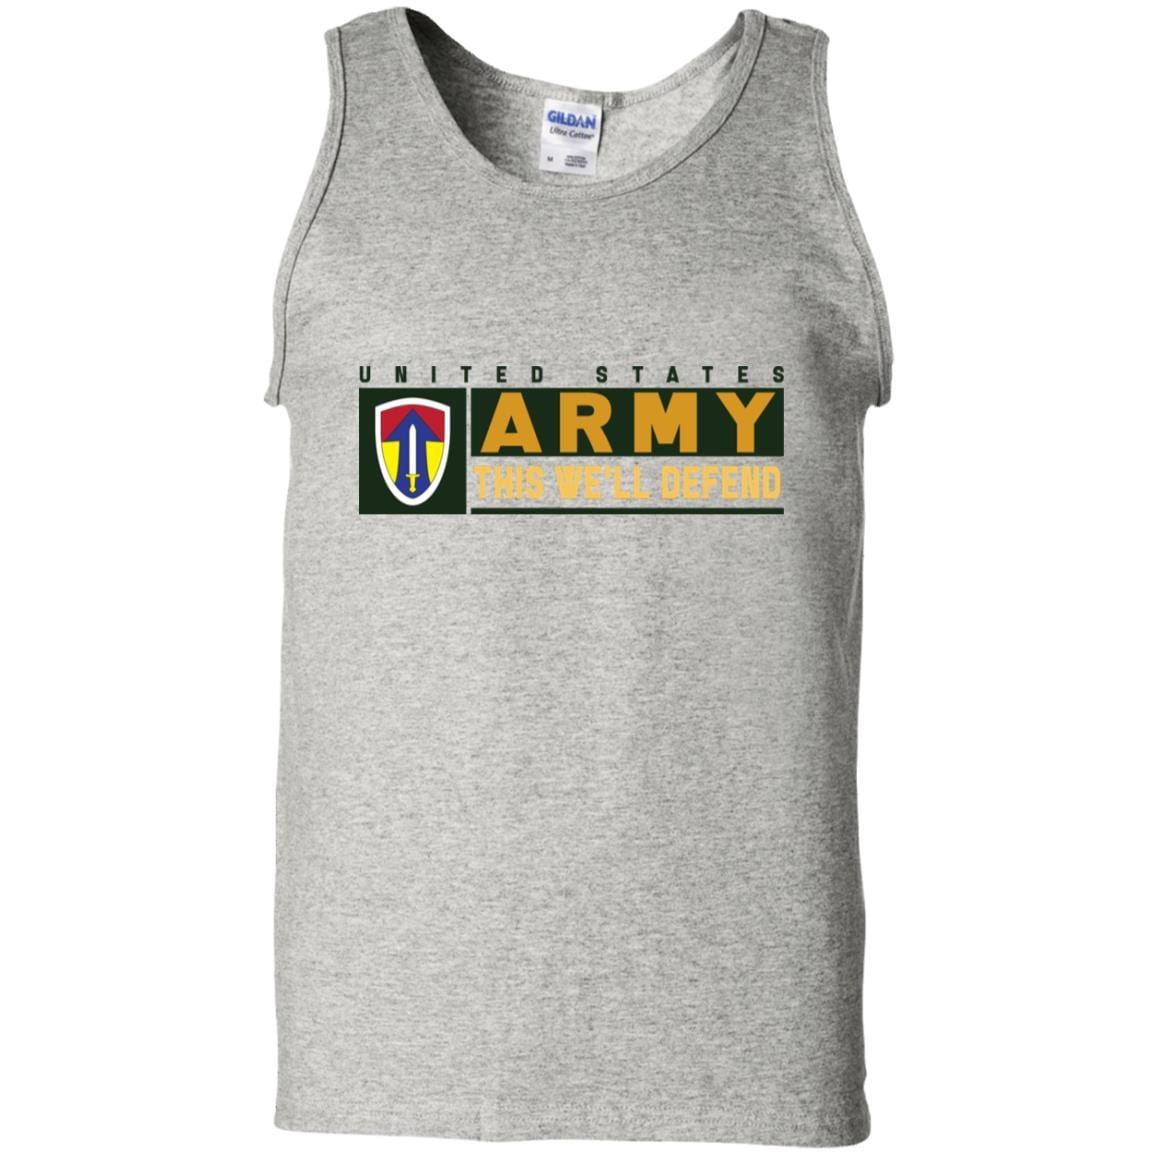 US Army 2 FIELD FORCE, VIETNAM- This We'll Defend T-Shirt On Front For Men-TShirt-Army-Veterans Nation